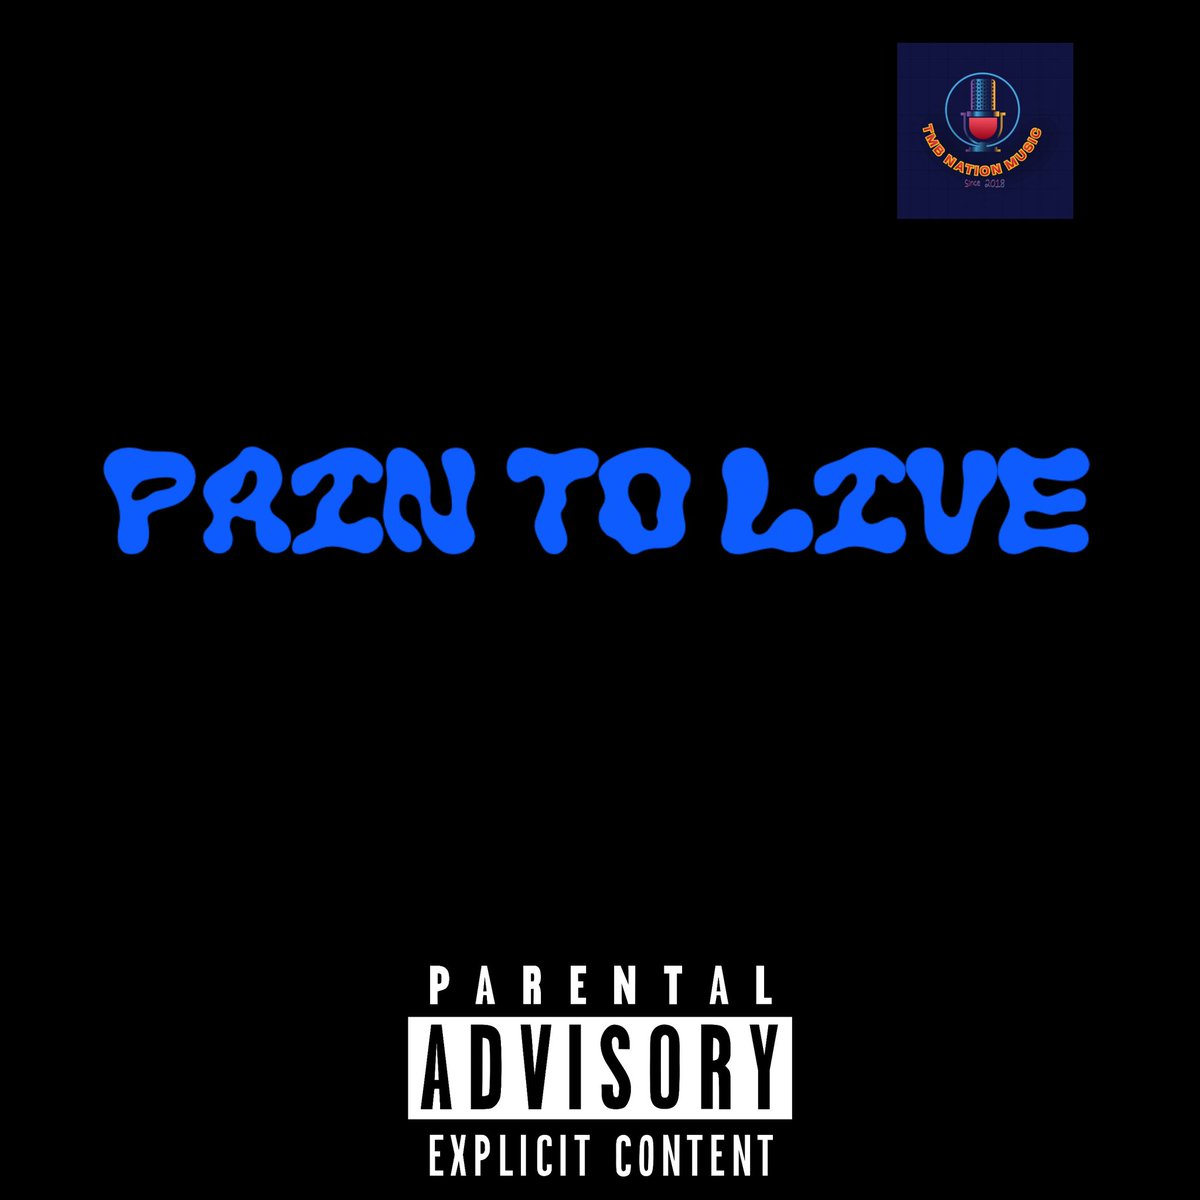 The street got more consequences than been in the crenches #PTL PAIN TO LIVE #THEALBUM SOON 🔜 #hiphopmusic #rapper #wizzymoni #rapconfidential #PAINTOLIVE 
@tmbnation_music